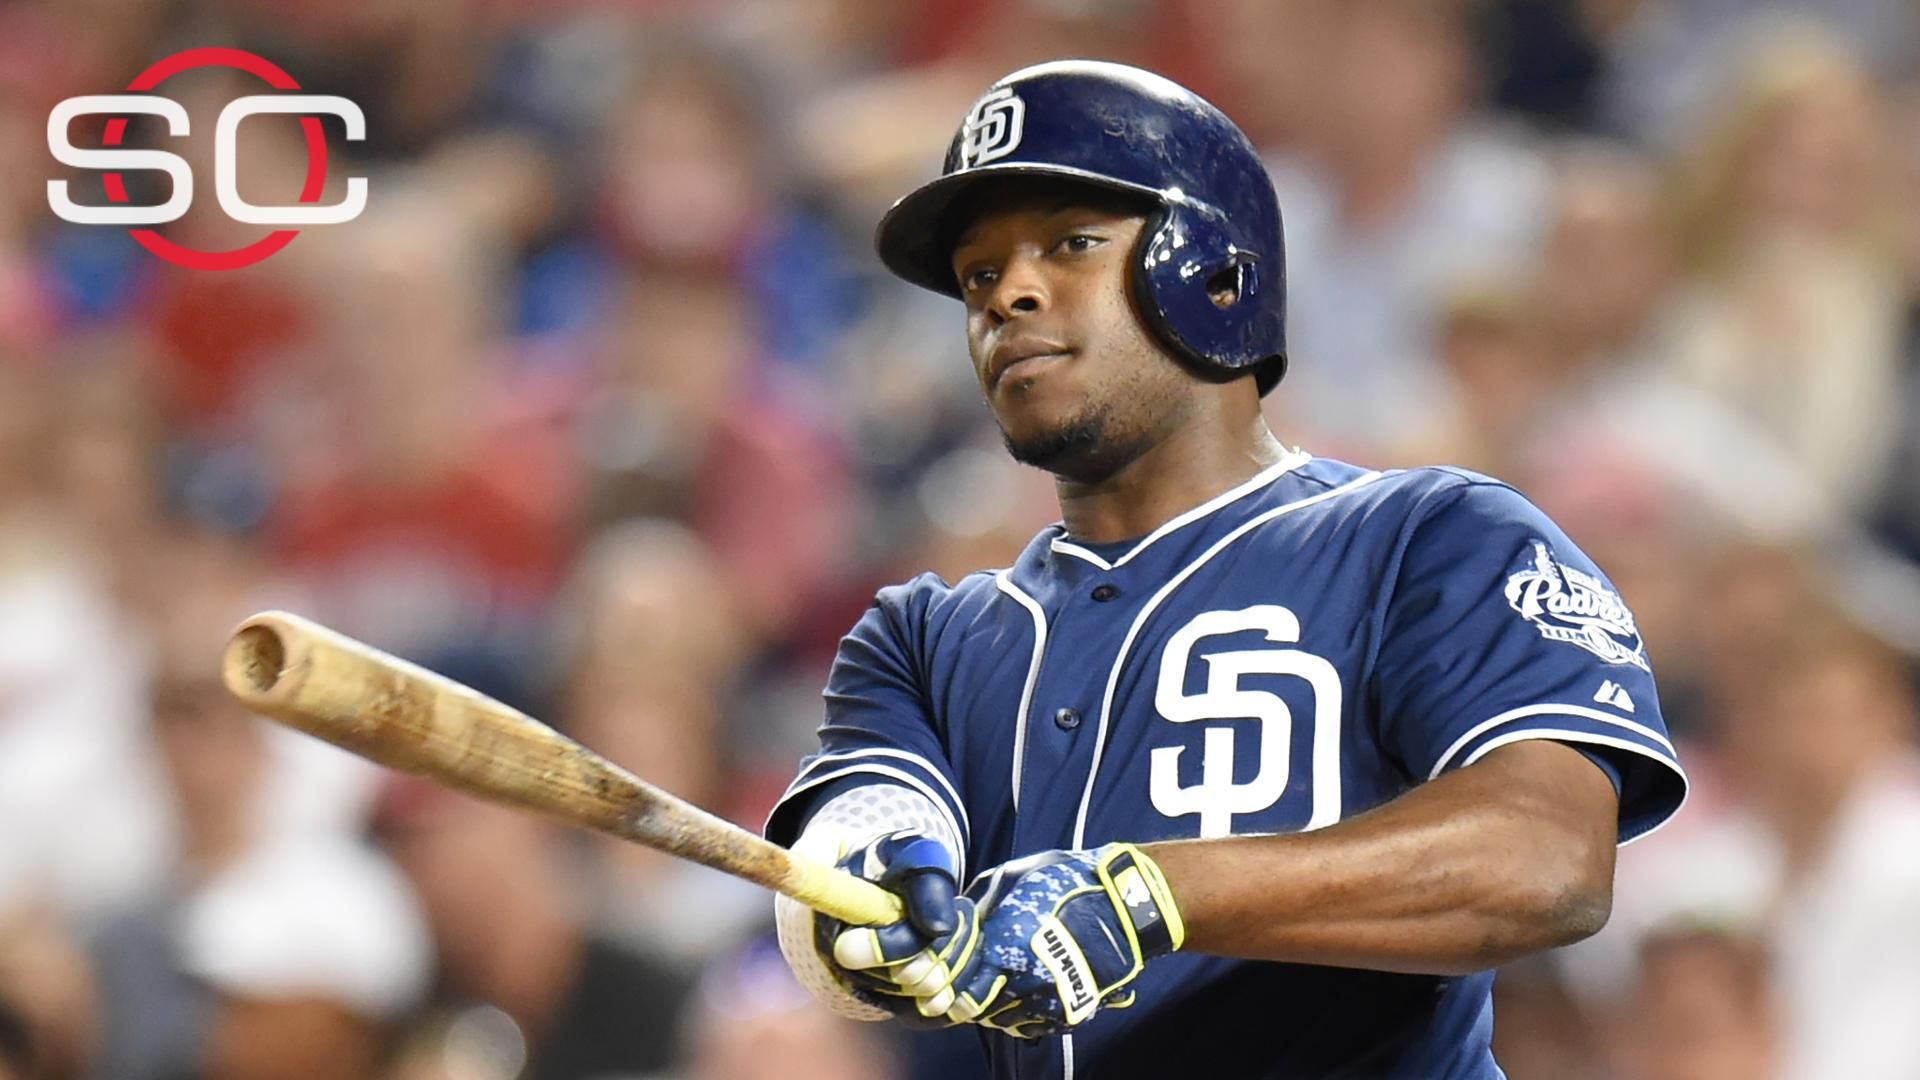 Detroit Tigers, outfielder Justin Upton agree to 6-year, $132.75M deal